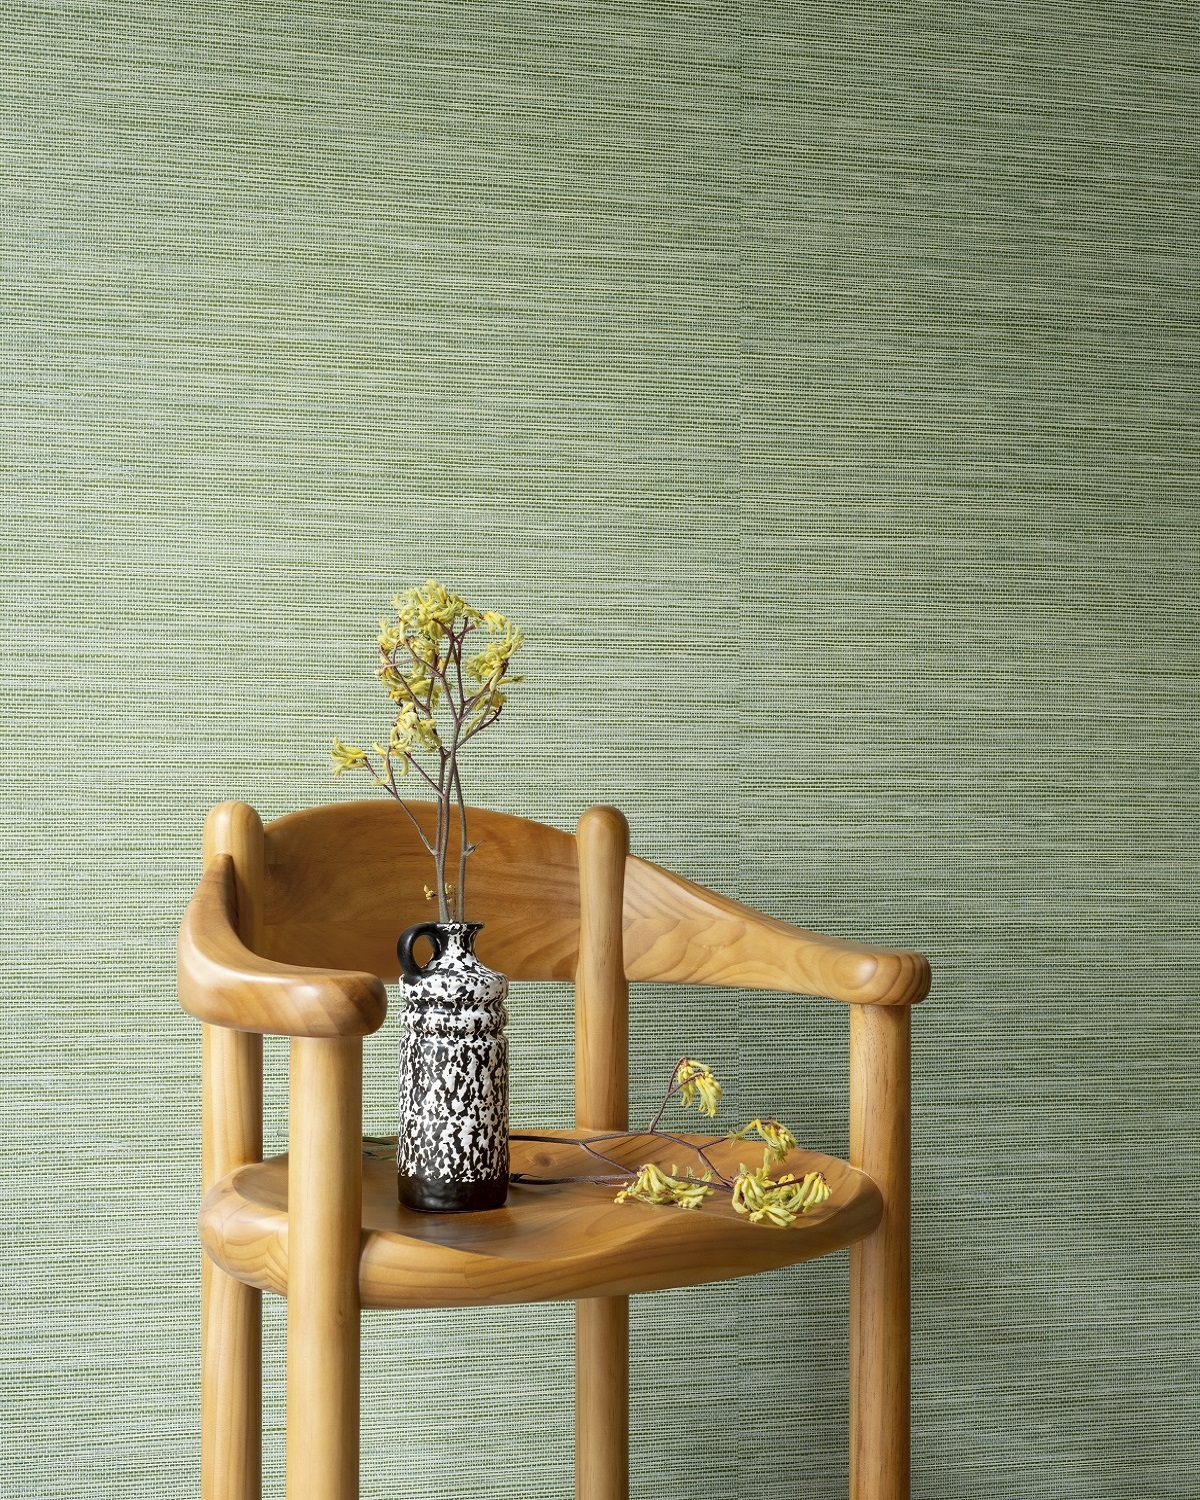 olive green textured wallcovering behind single wooden chair with vase and flowers